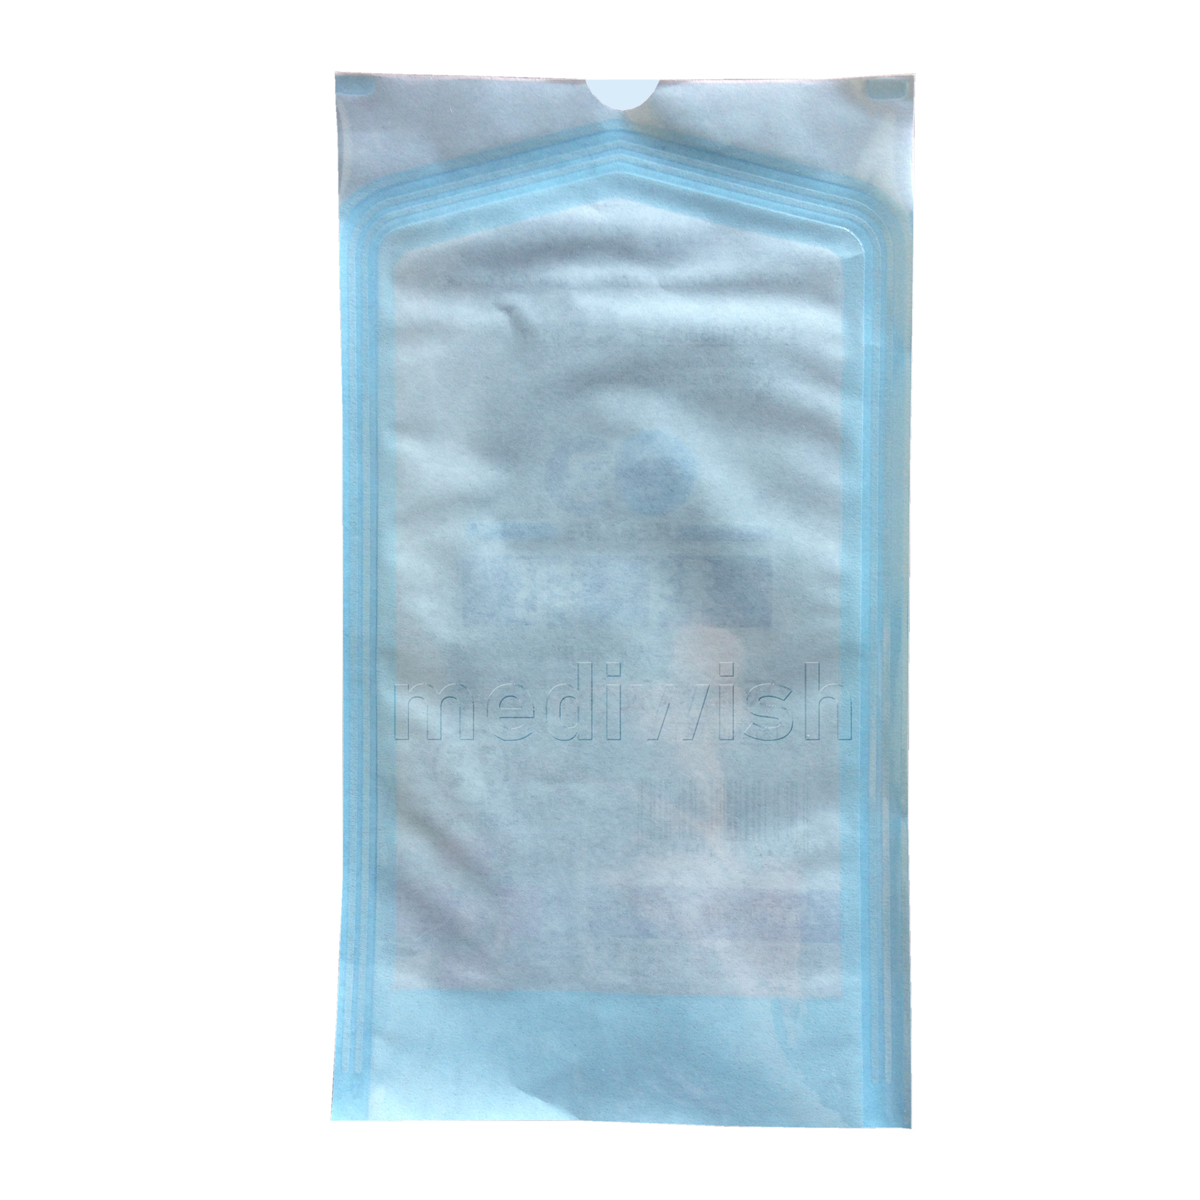 High Quality Sterilization Pouch Featured Image